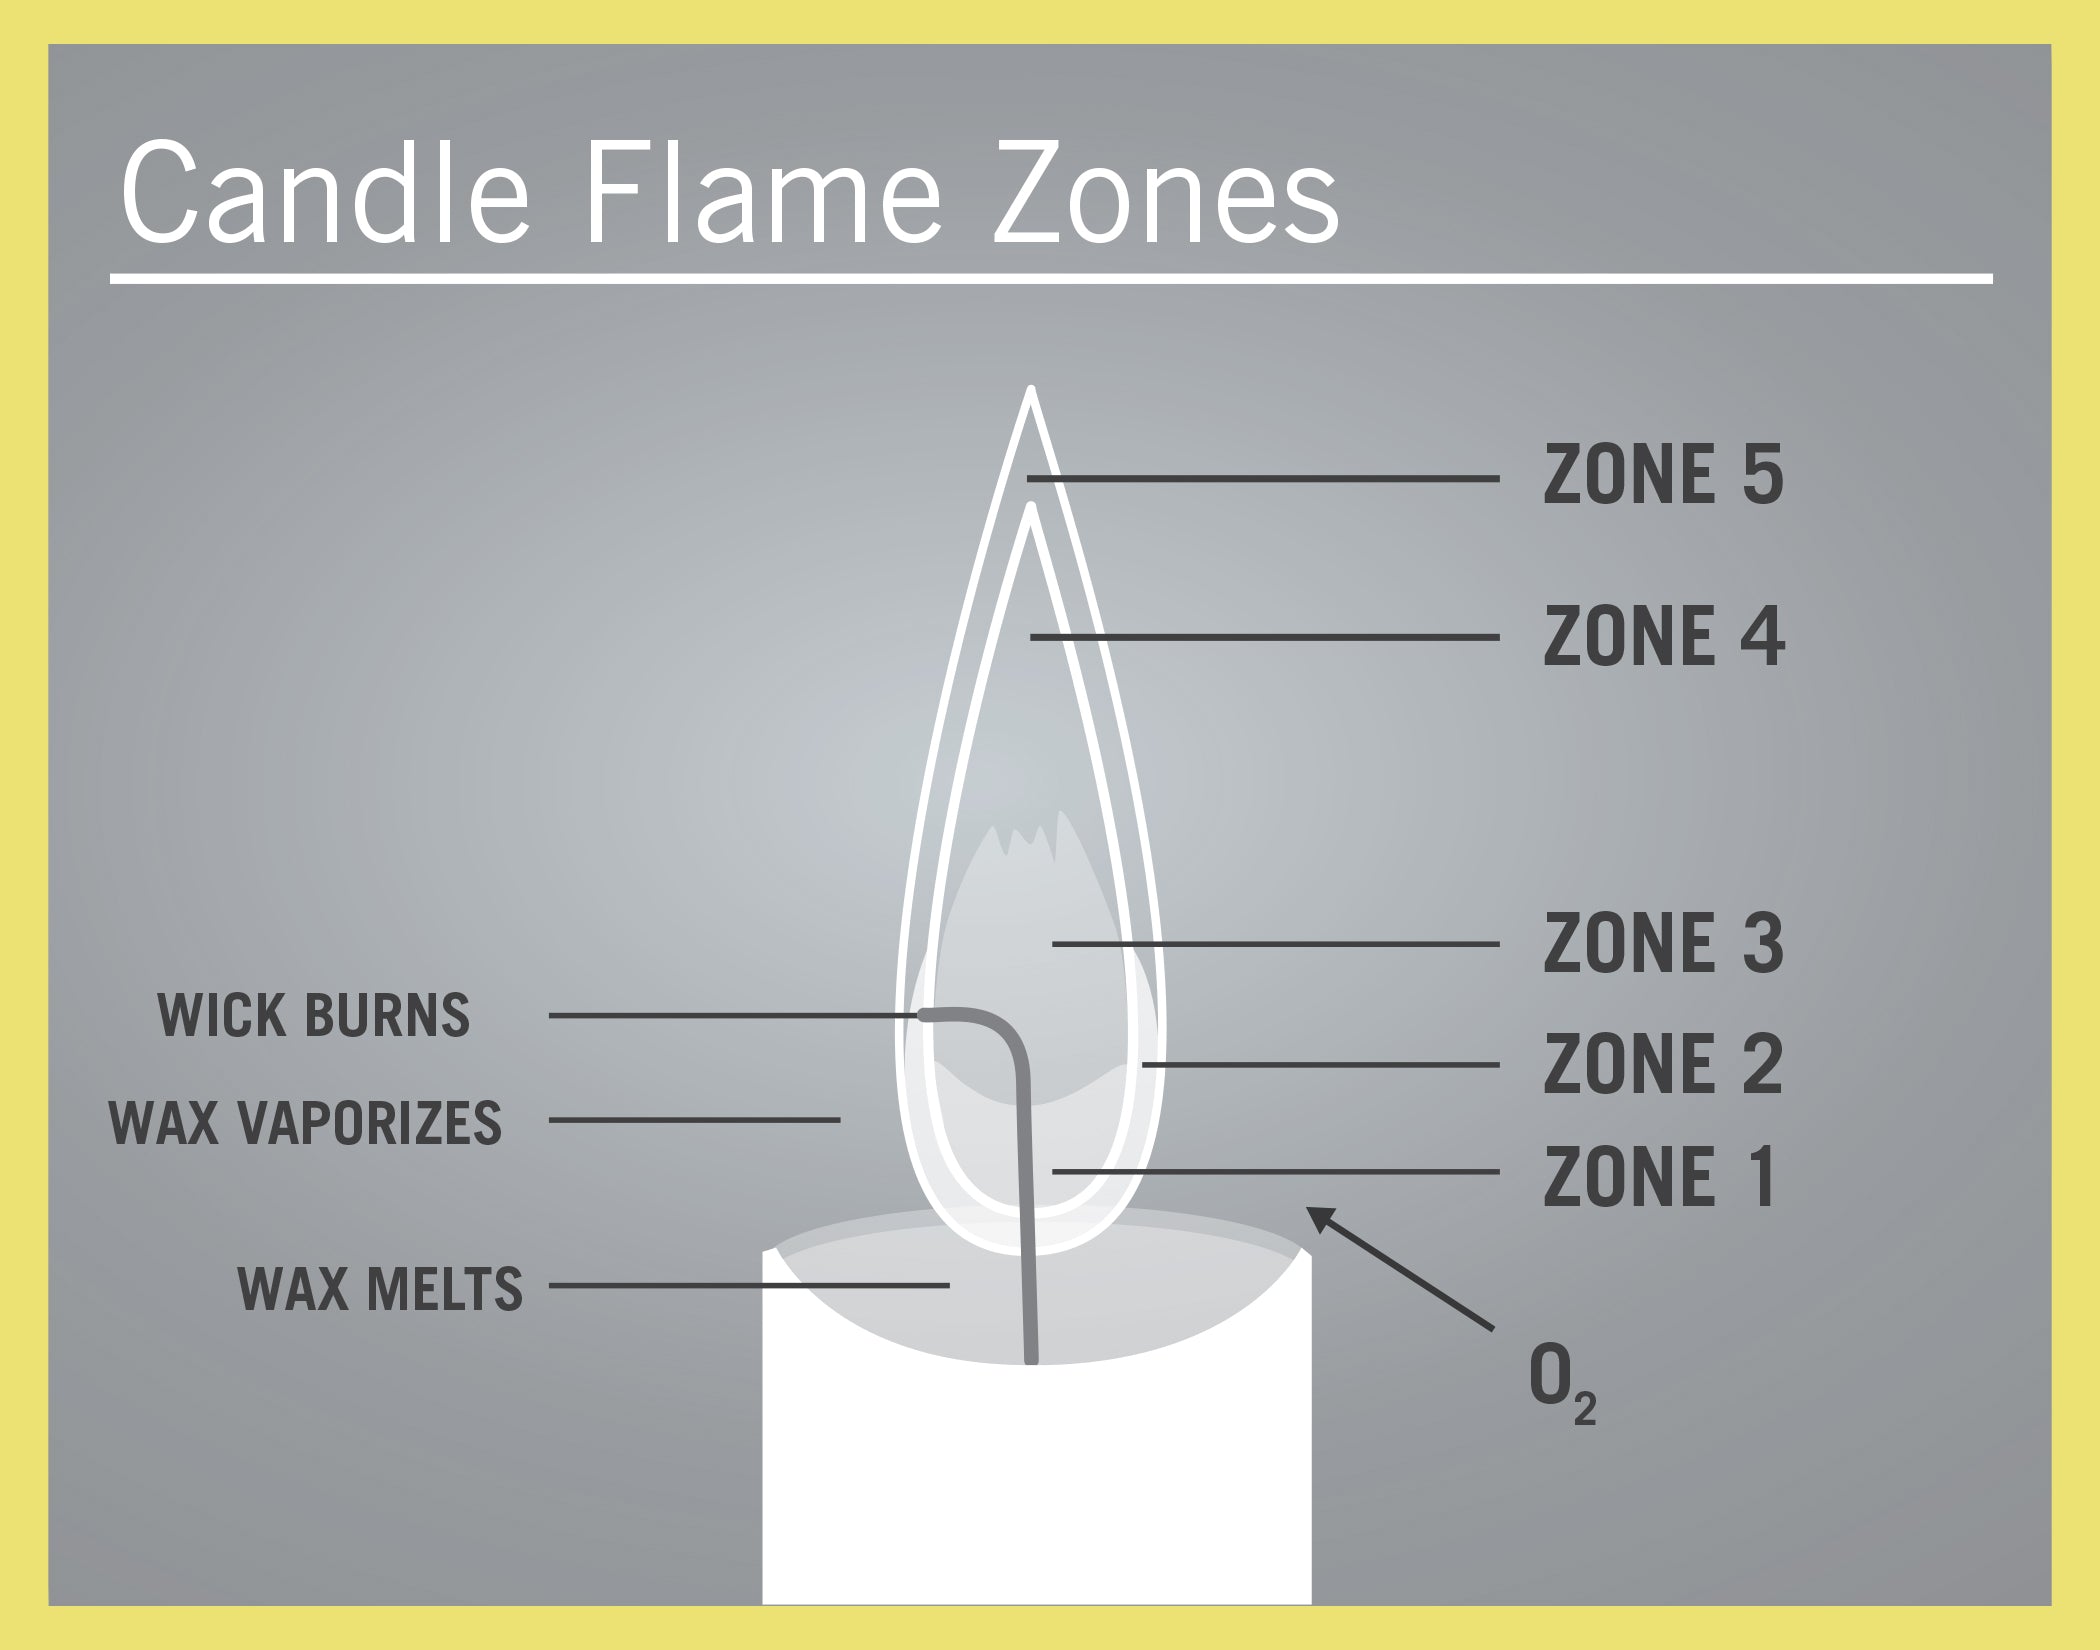 Candle flame zones diagram